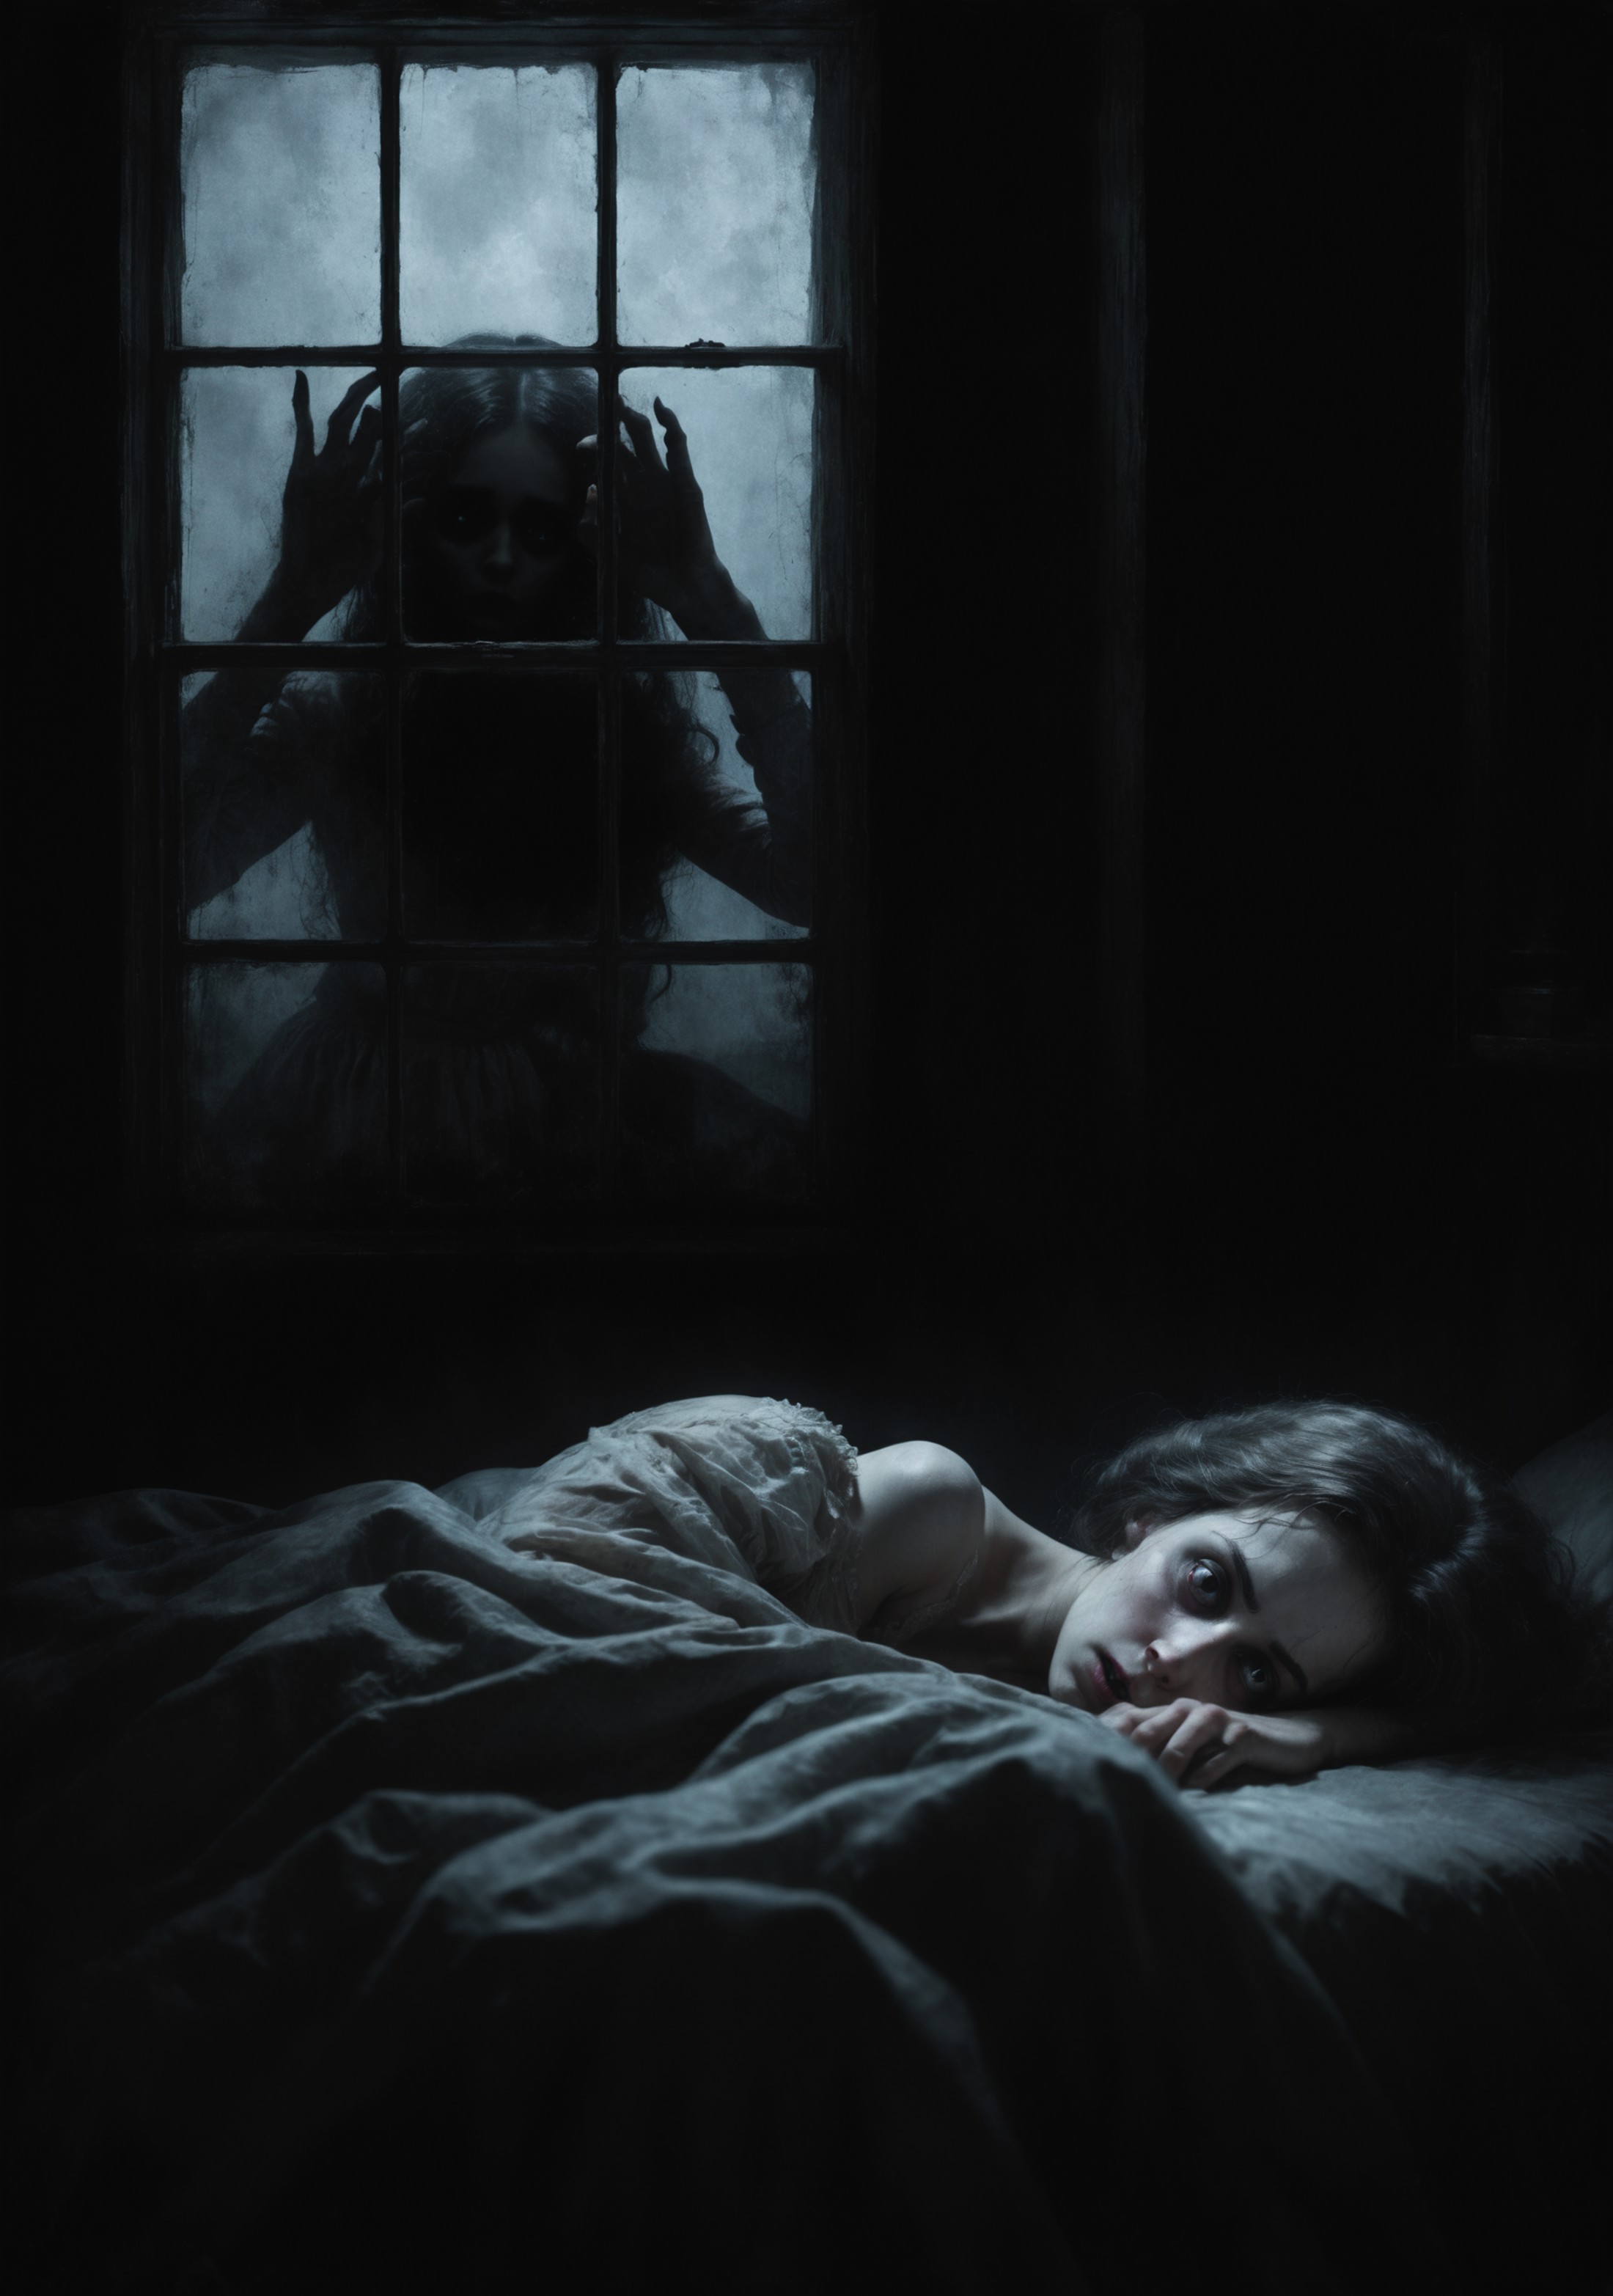 in the 19th century, in his bed, a woman is frightened by a terrifying figure of a girl who watches him from behind the wi...